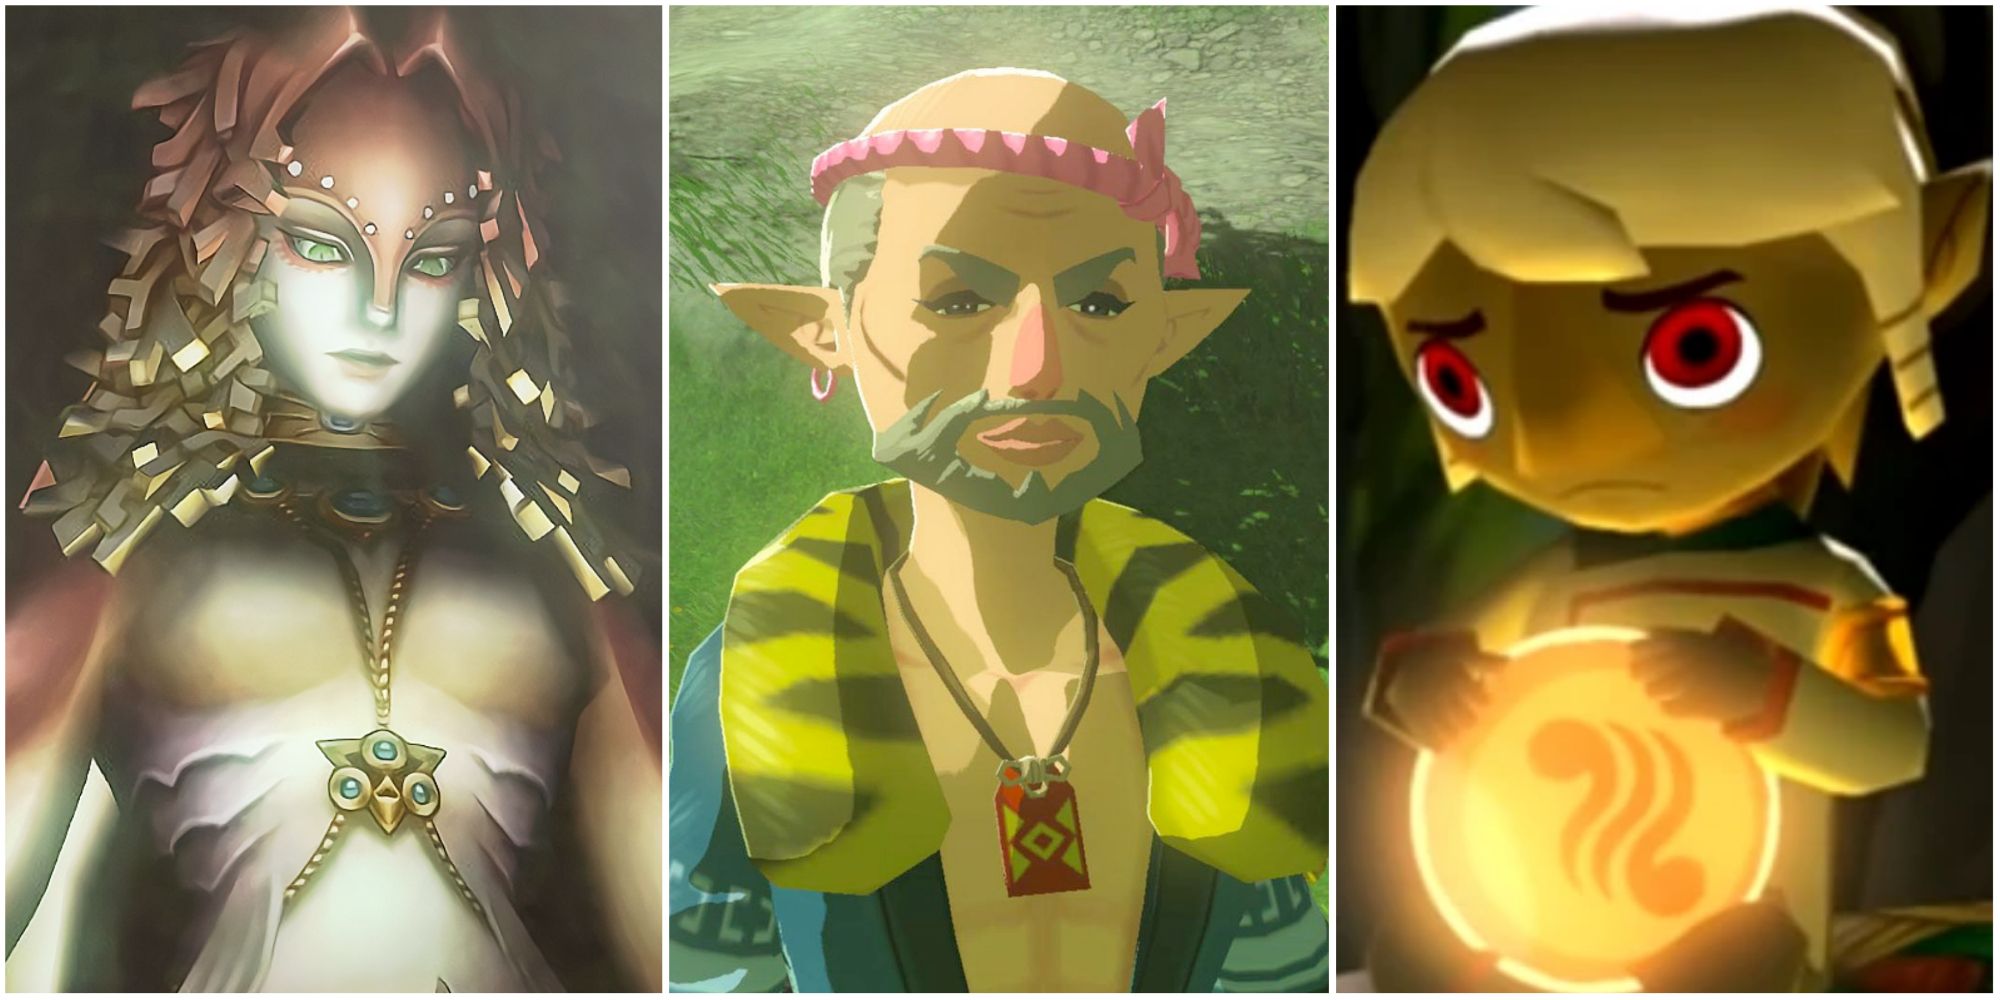 Split image screenshots of Rutela from Twilight Princess, Bolson from Breath of the Wild, and Komali from The Wind Waker.